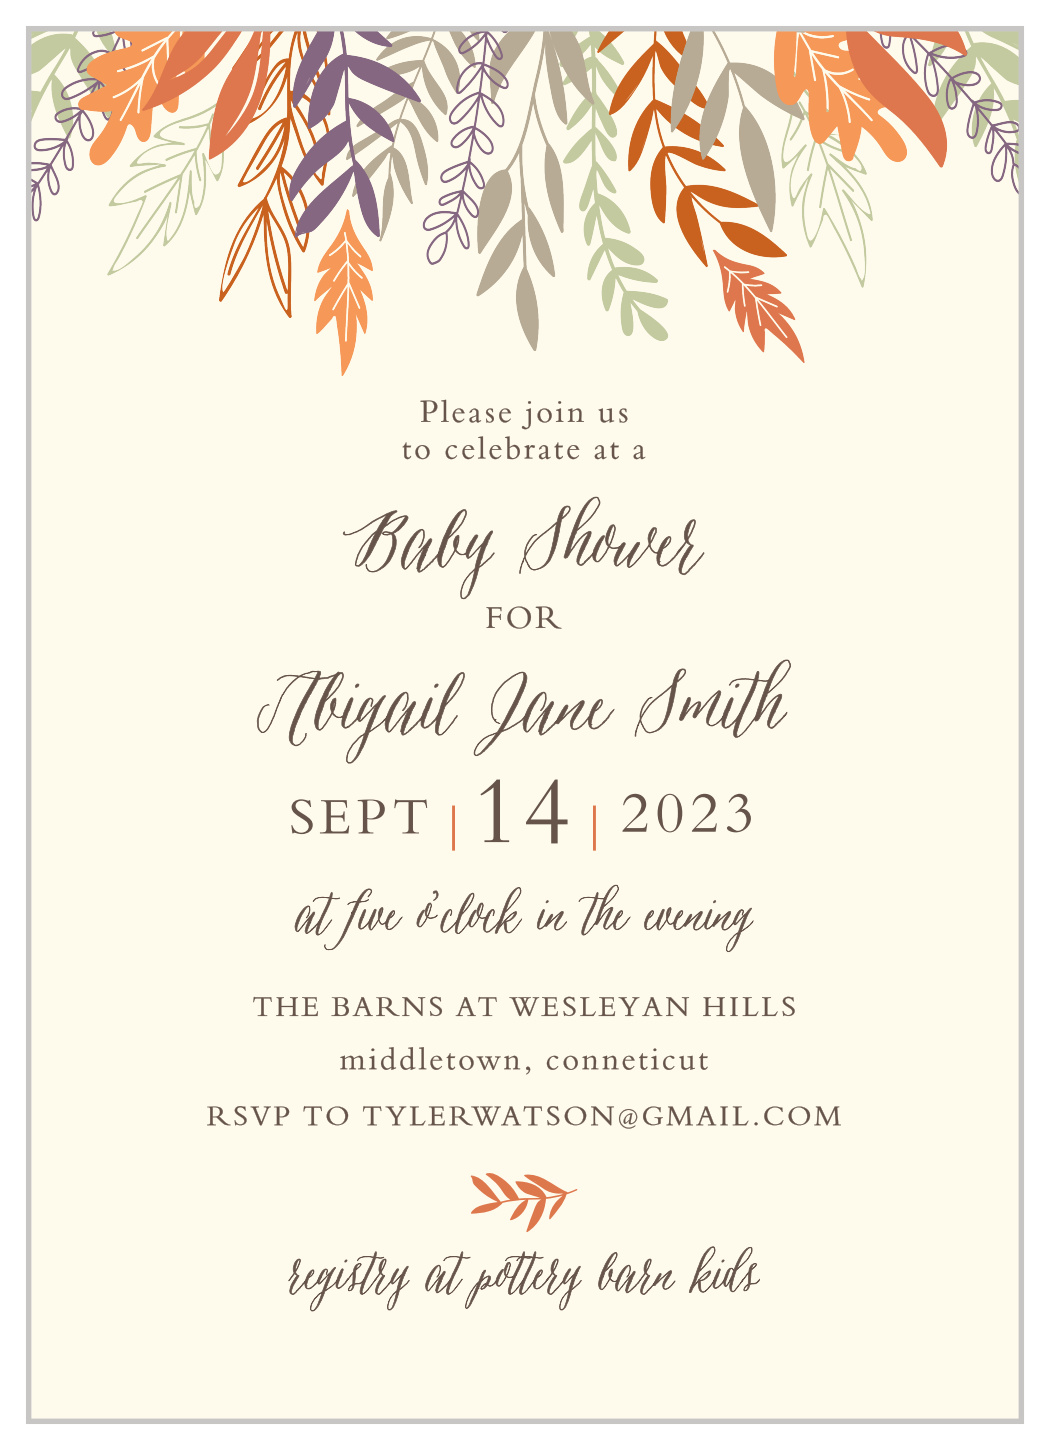 please join us for baby shower